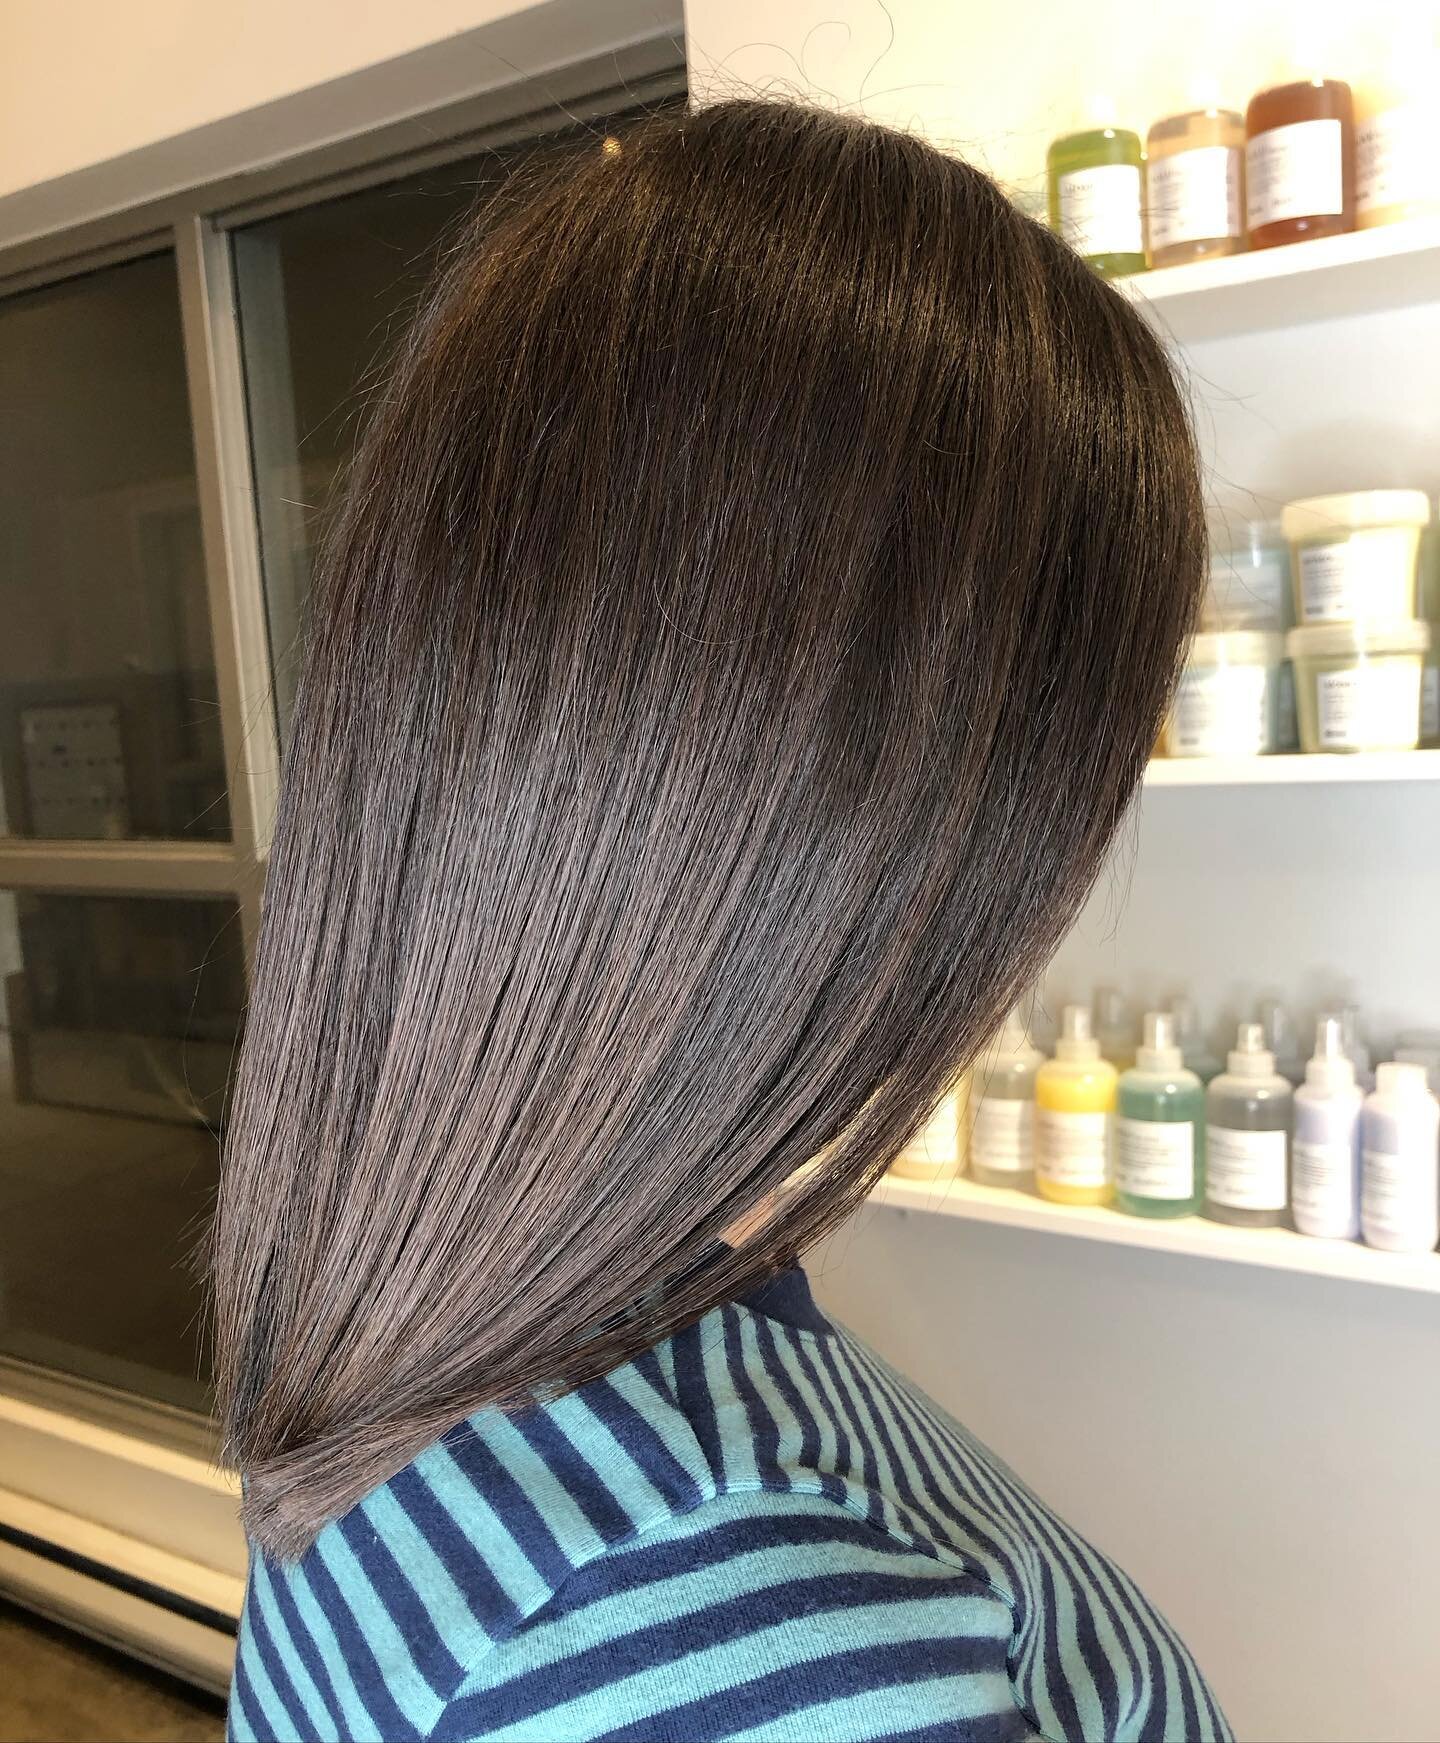 What better way to celebrate the 1st day of Spring than a great hair cut @ alixarthurdesign.com.
&bull;
&bull;
&bull;
&bull;
#vancouverhaircut #springhair #haircut #brunette #lob